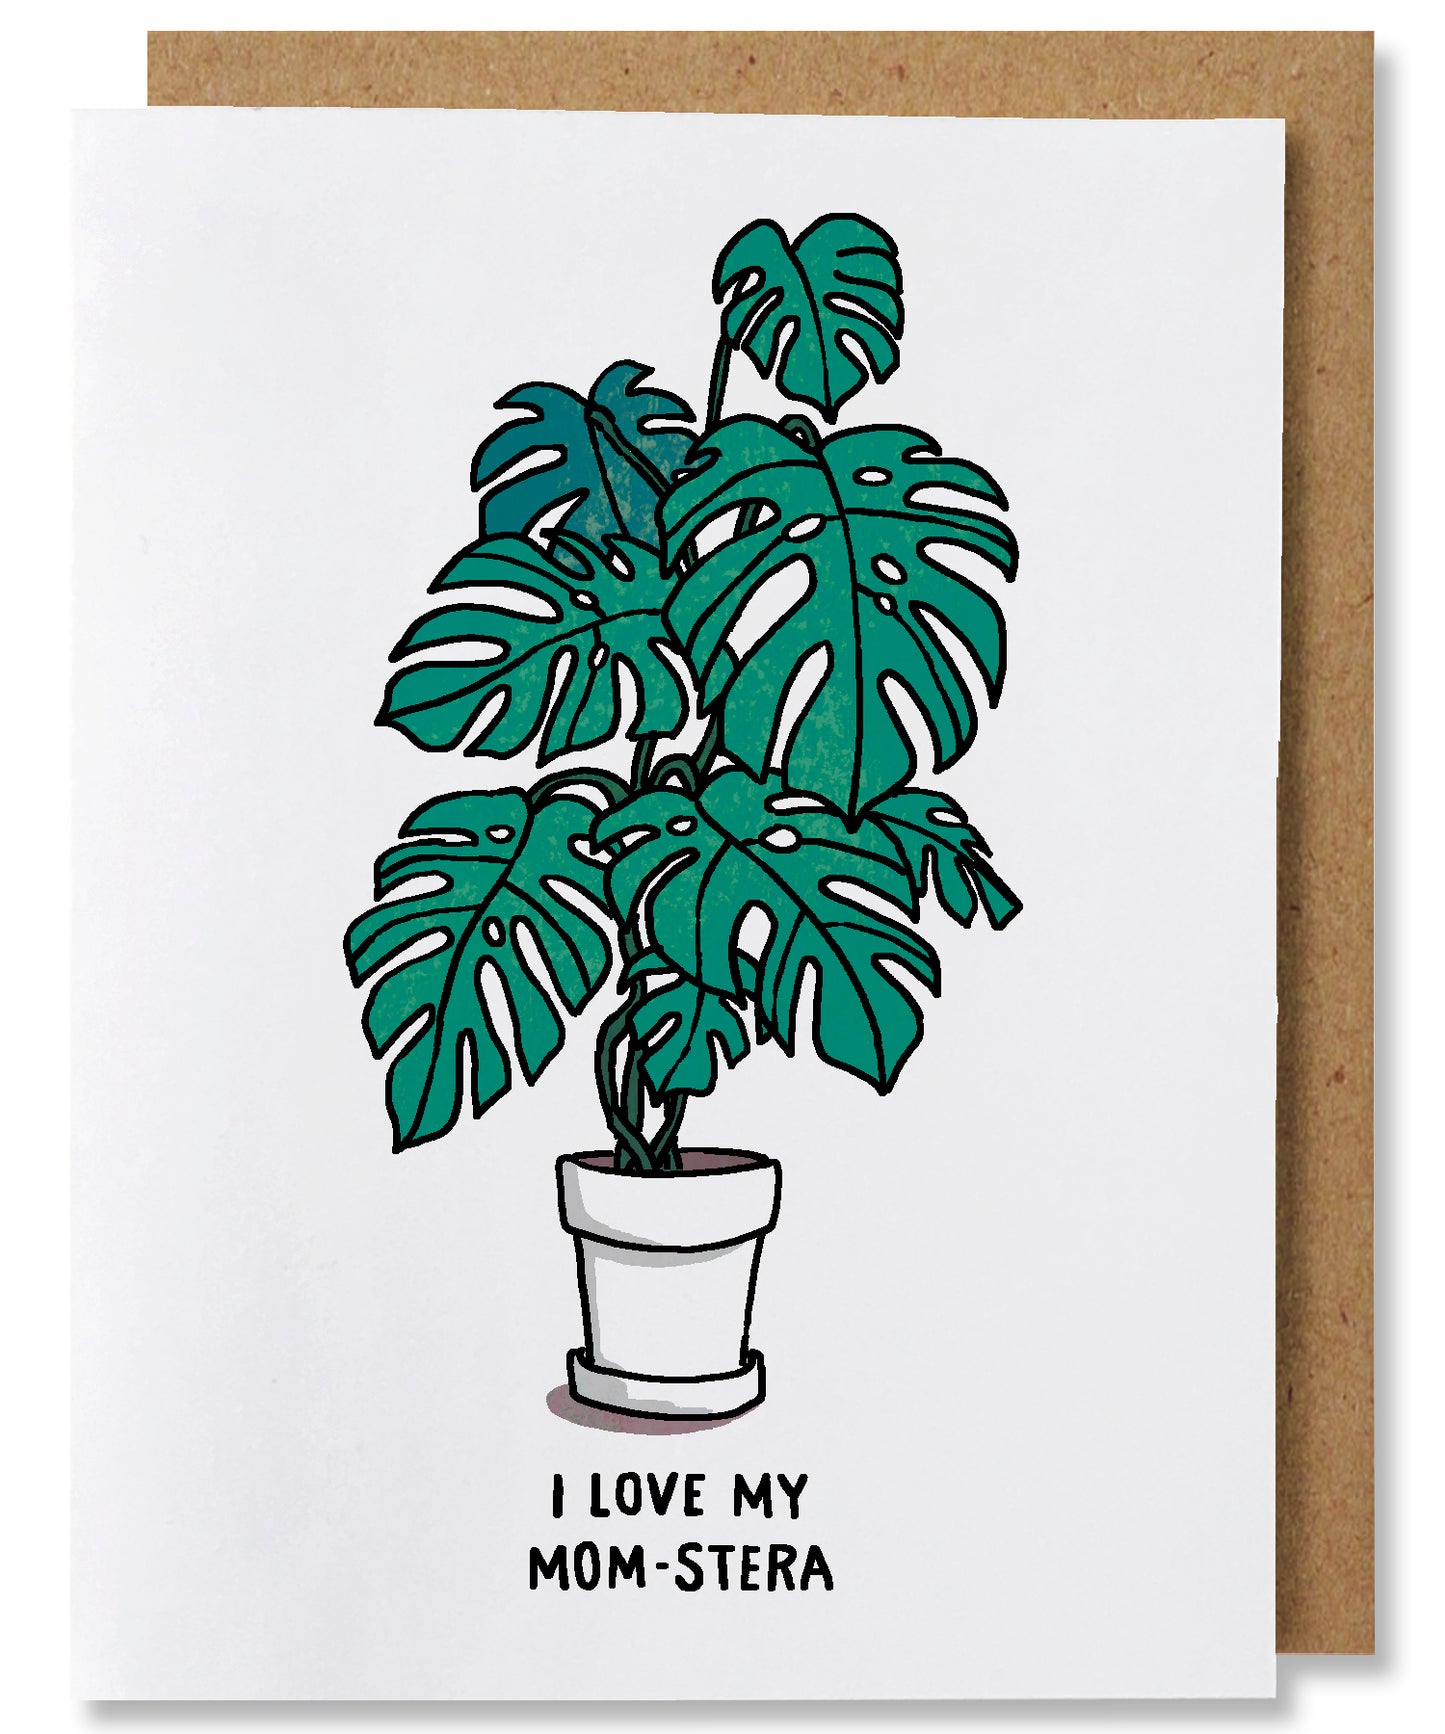 I Love My Mom-stera is a white ground greeting card that features a monstera deliciosa plant potted in a white planter. The words beneath say "I love my Mom-stera". This card is paired with a brown kraft envelope